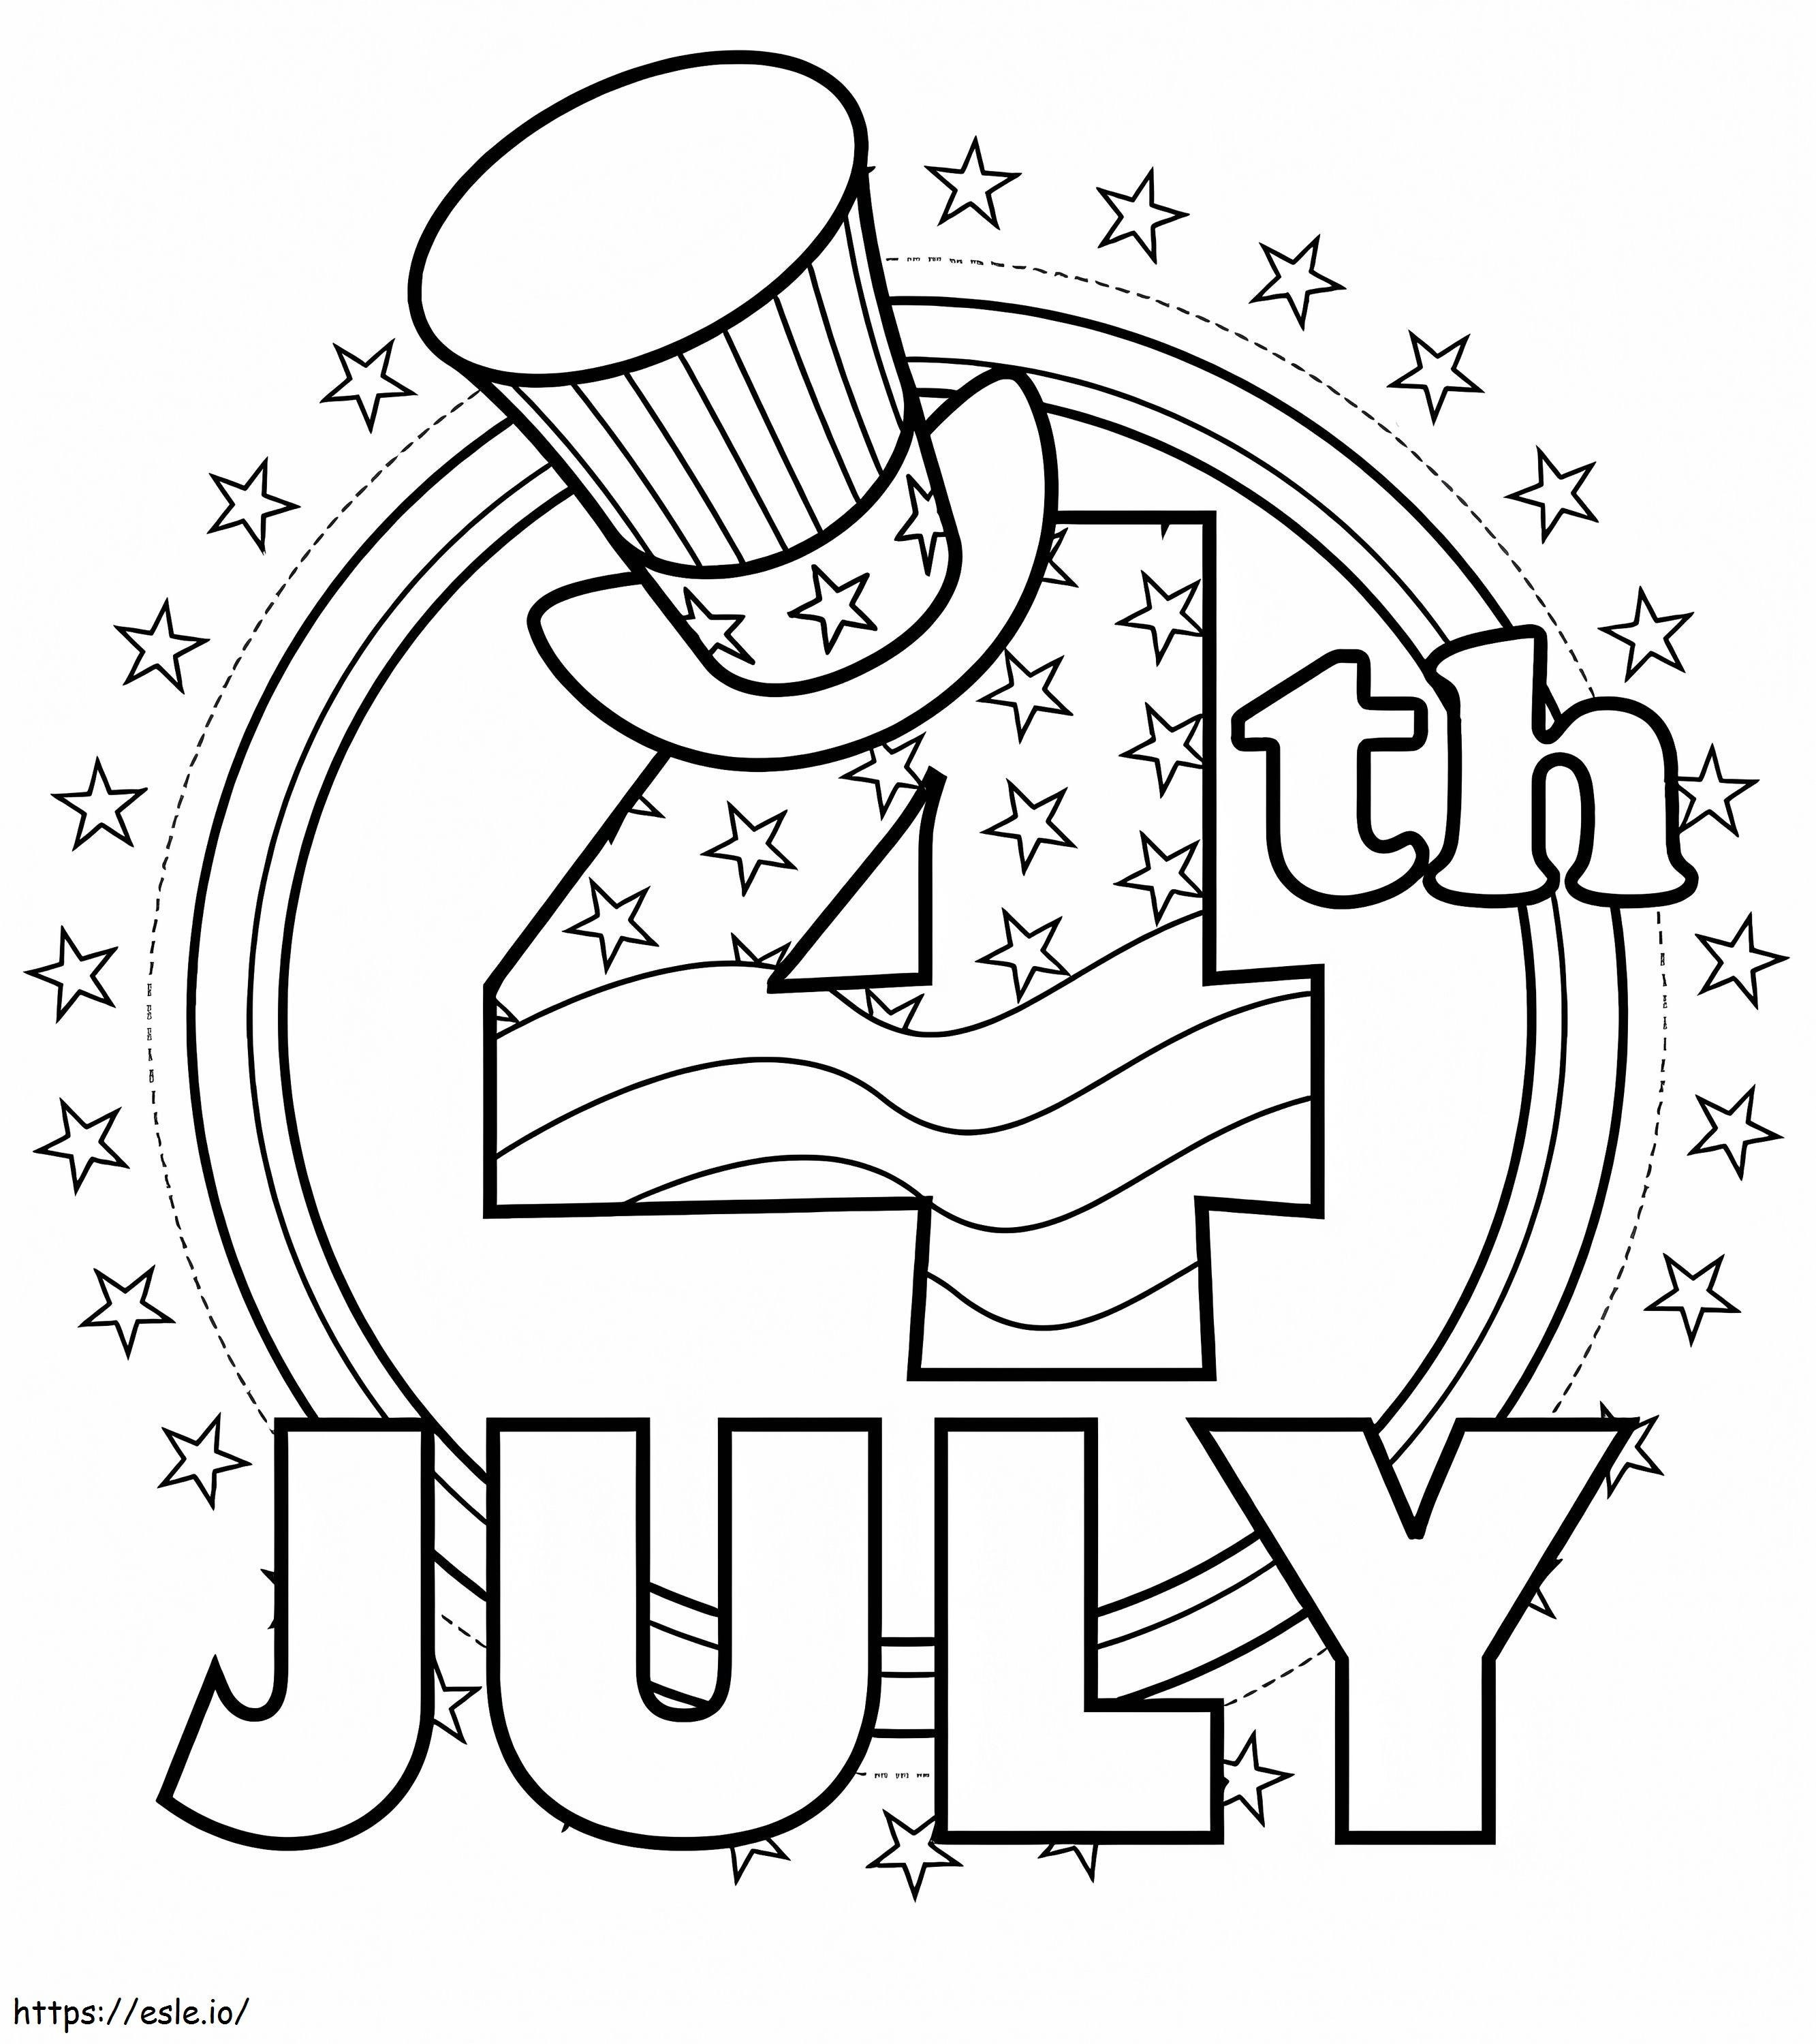 4Th Of July American Independence Day coloring page